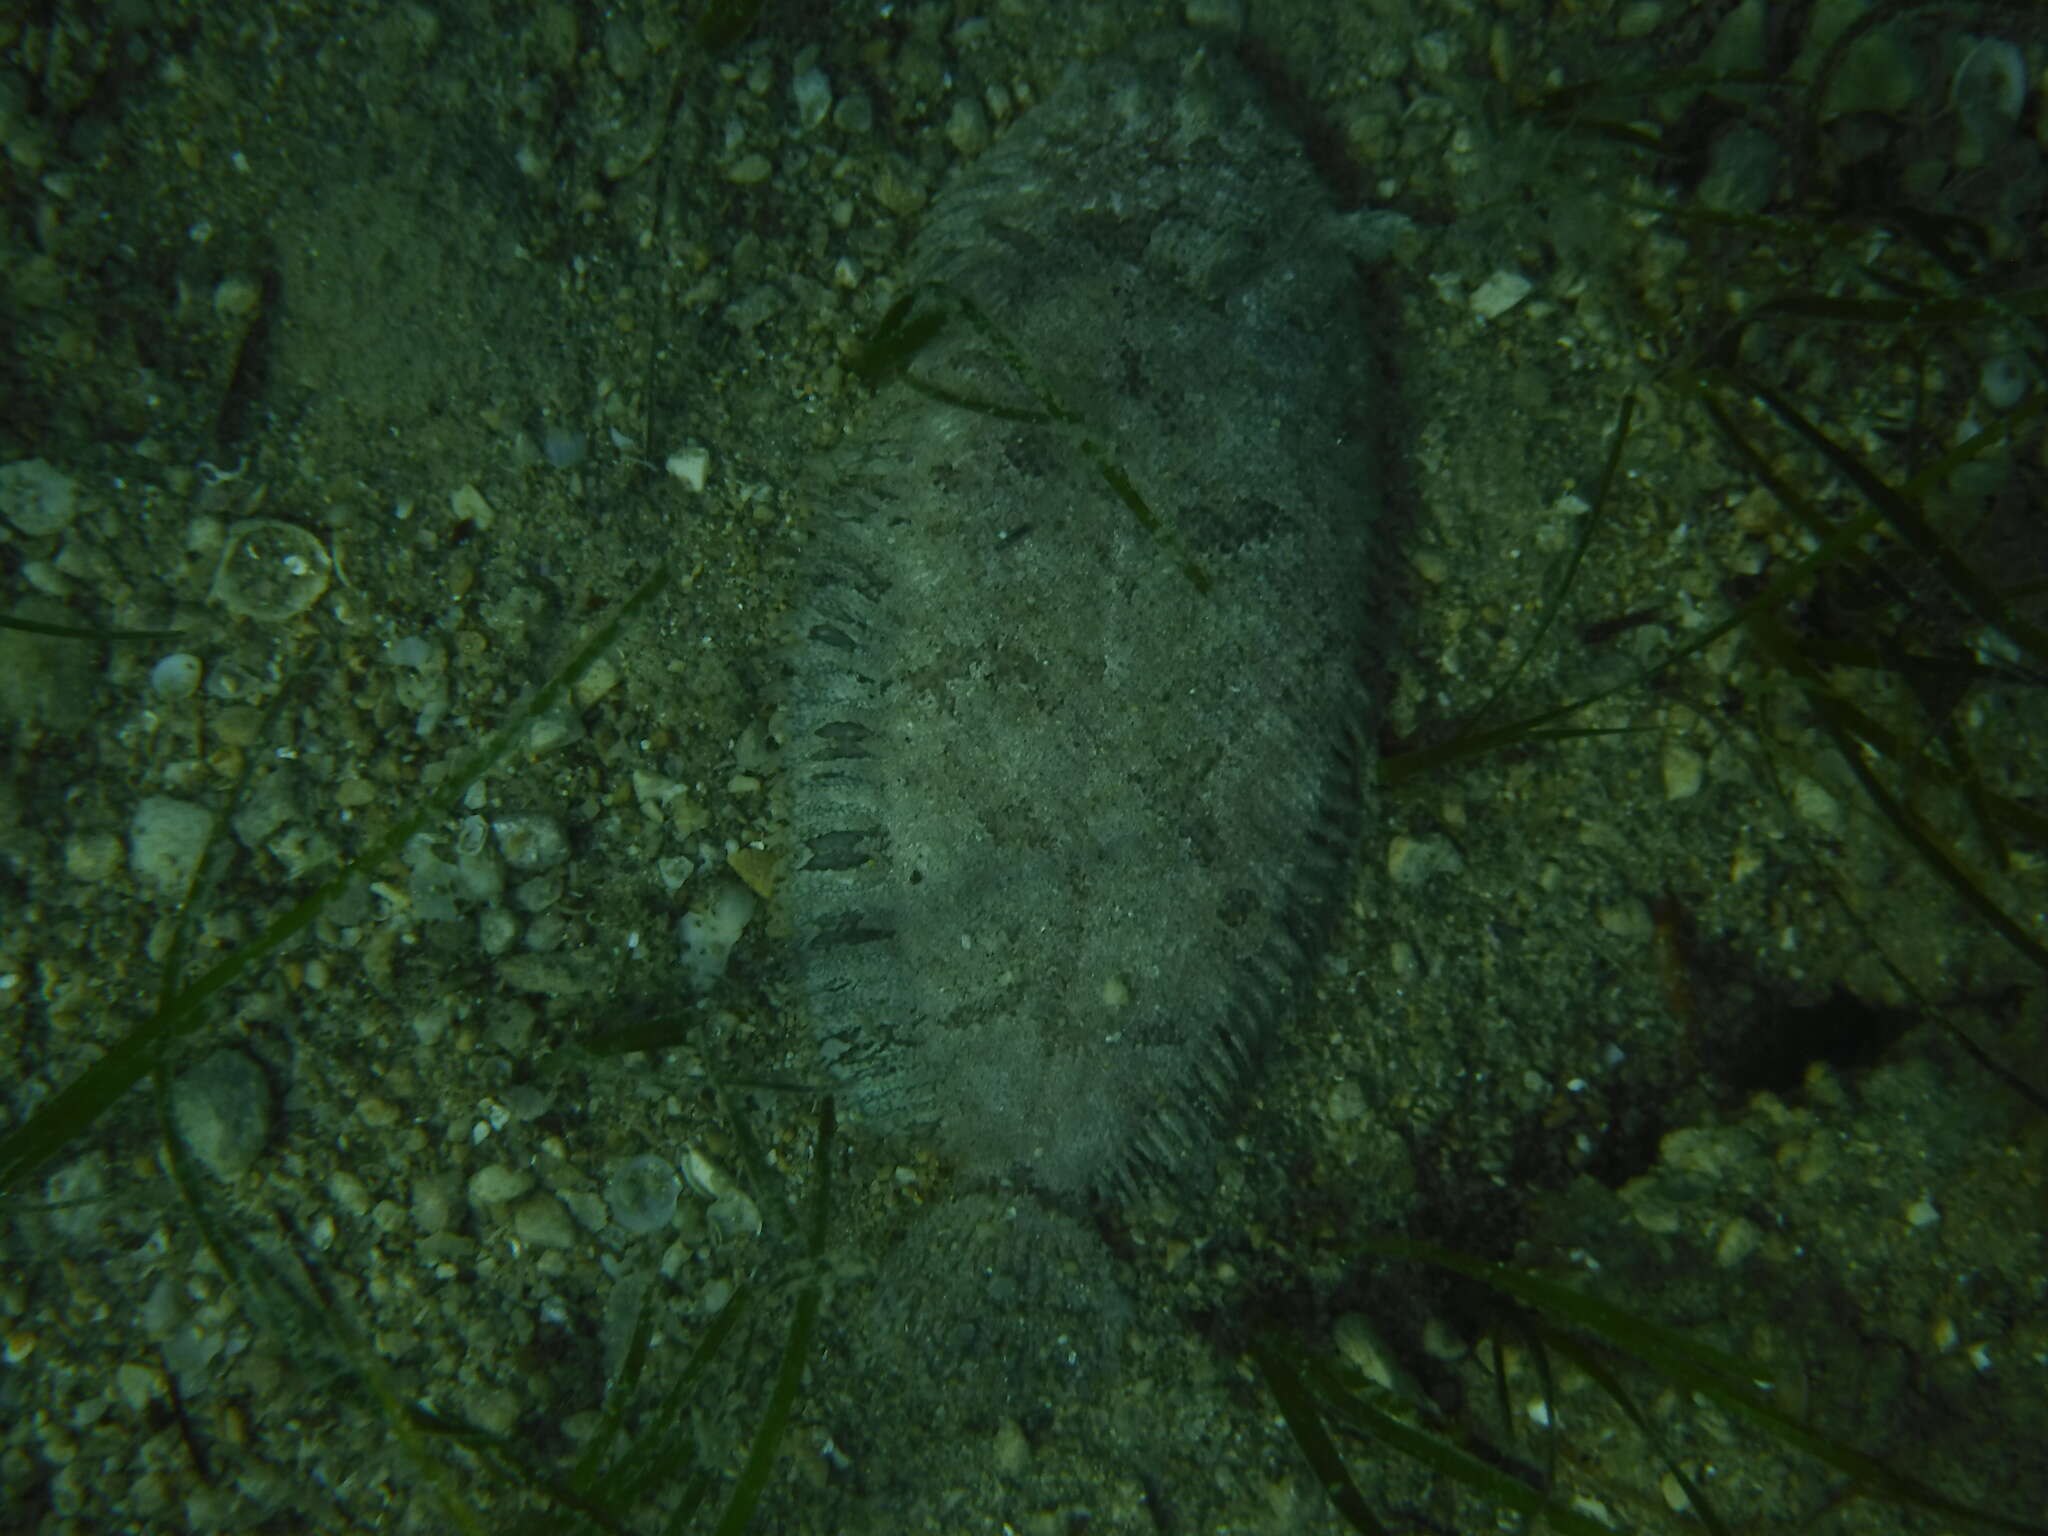 Image of Whiskered sole